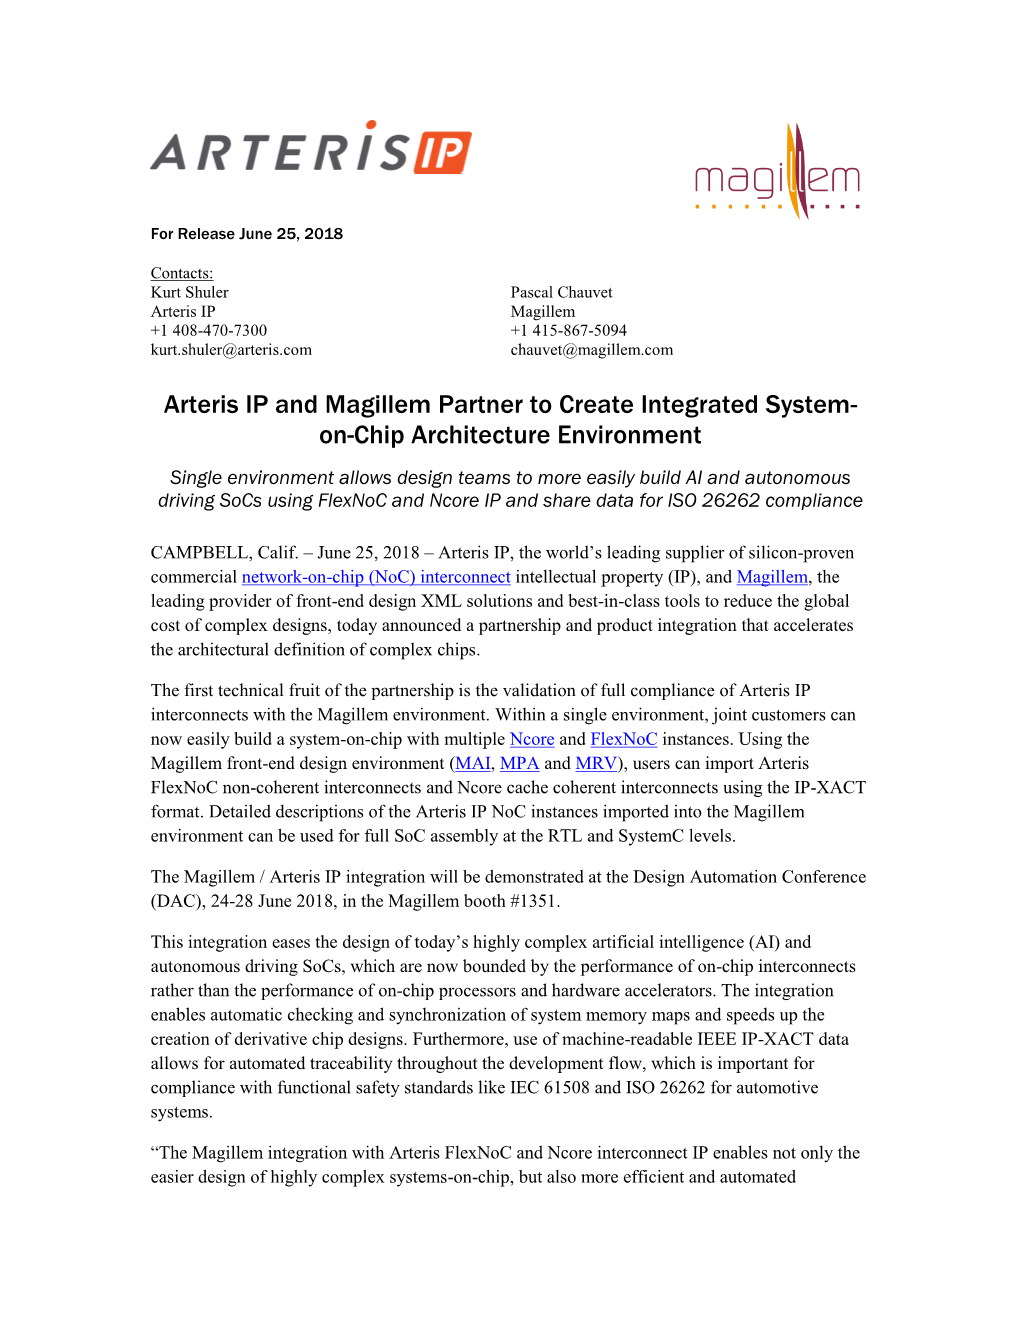 Arteris IP and Magillem Partner to Create Integrated System- On-Chip